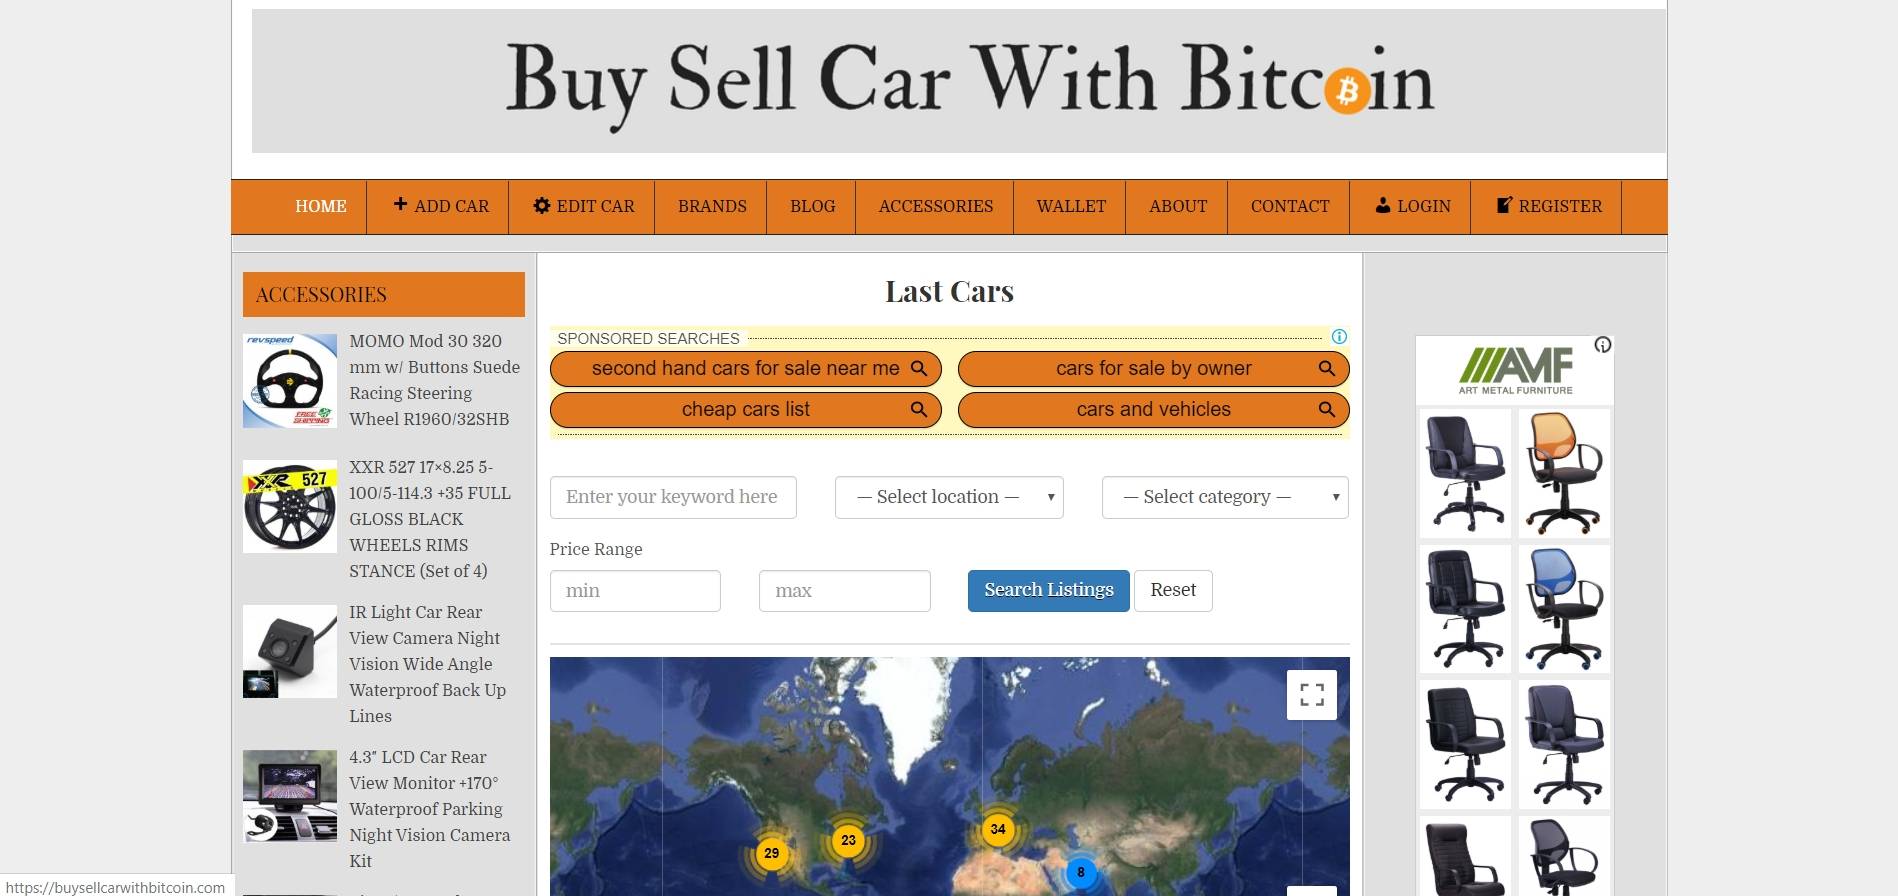 Buy Sell Car With Bitcoin